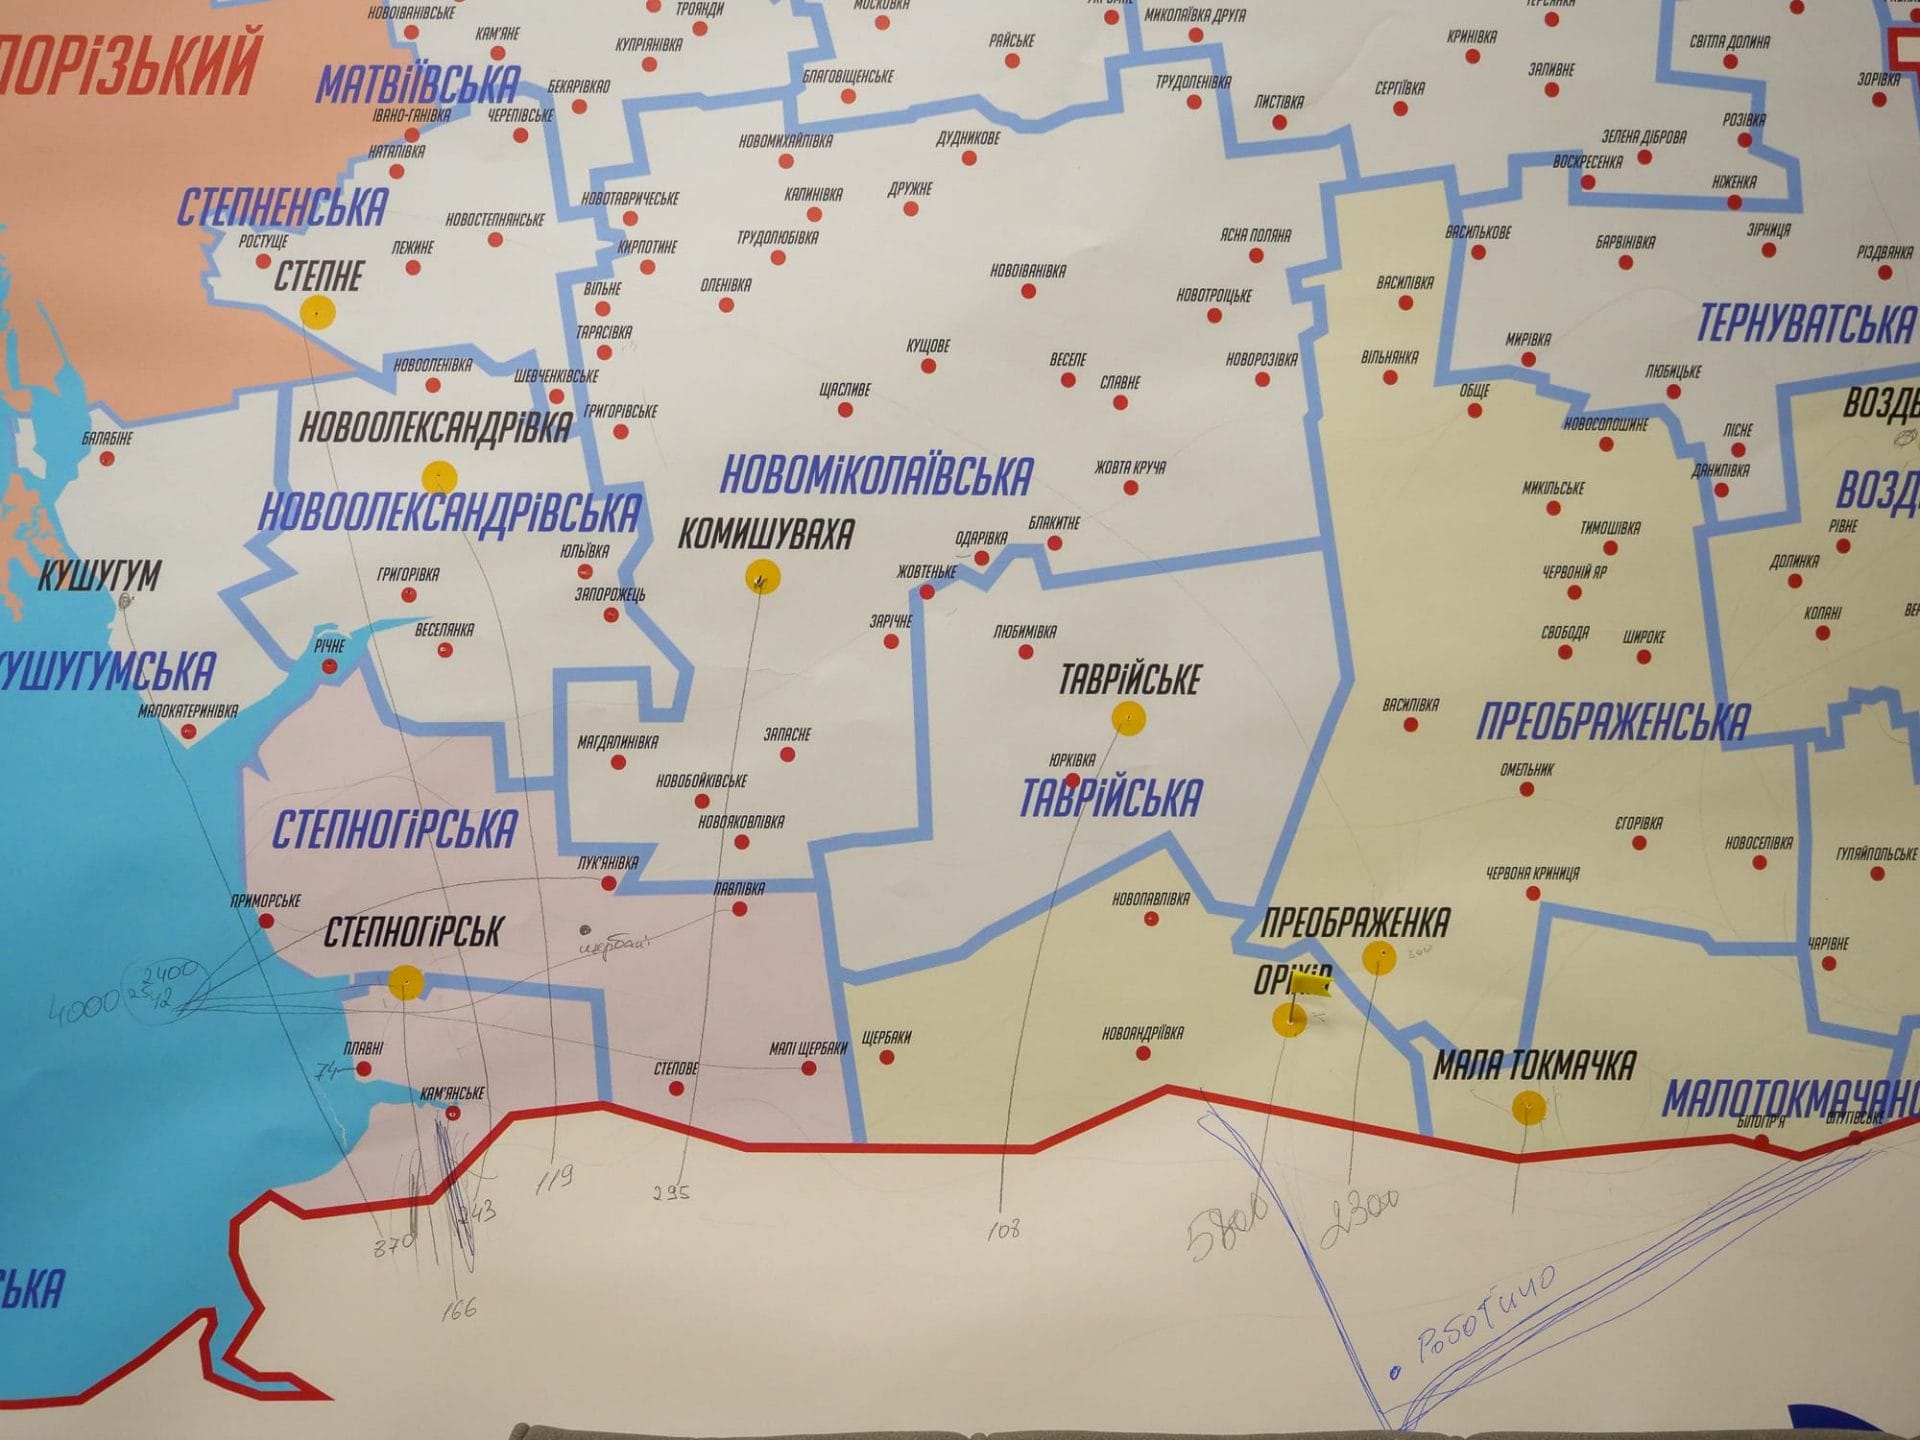 A map of ukrainian provinces in the Zaporizhzhia oblast. By pen, numbers of the residents in the villages are written next to the names.